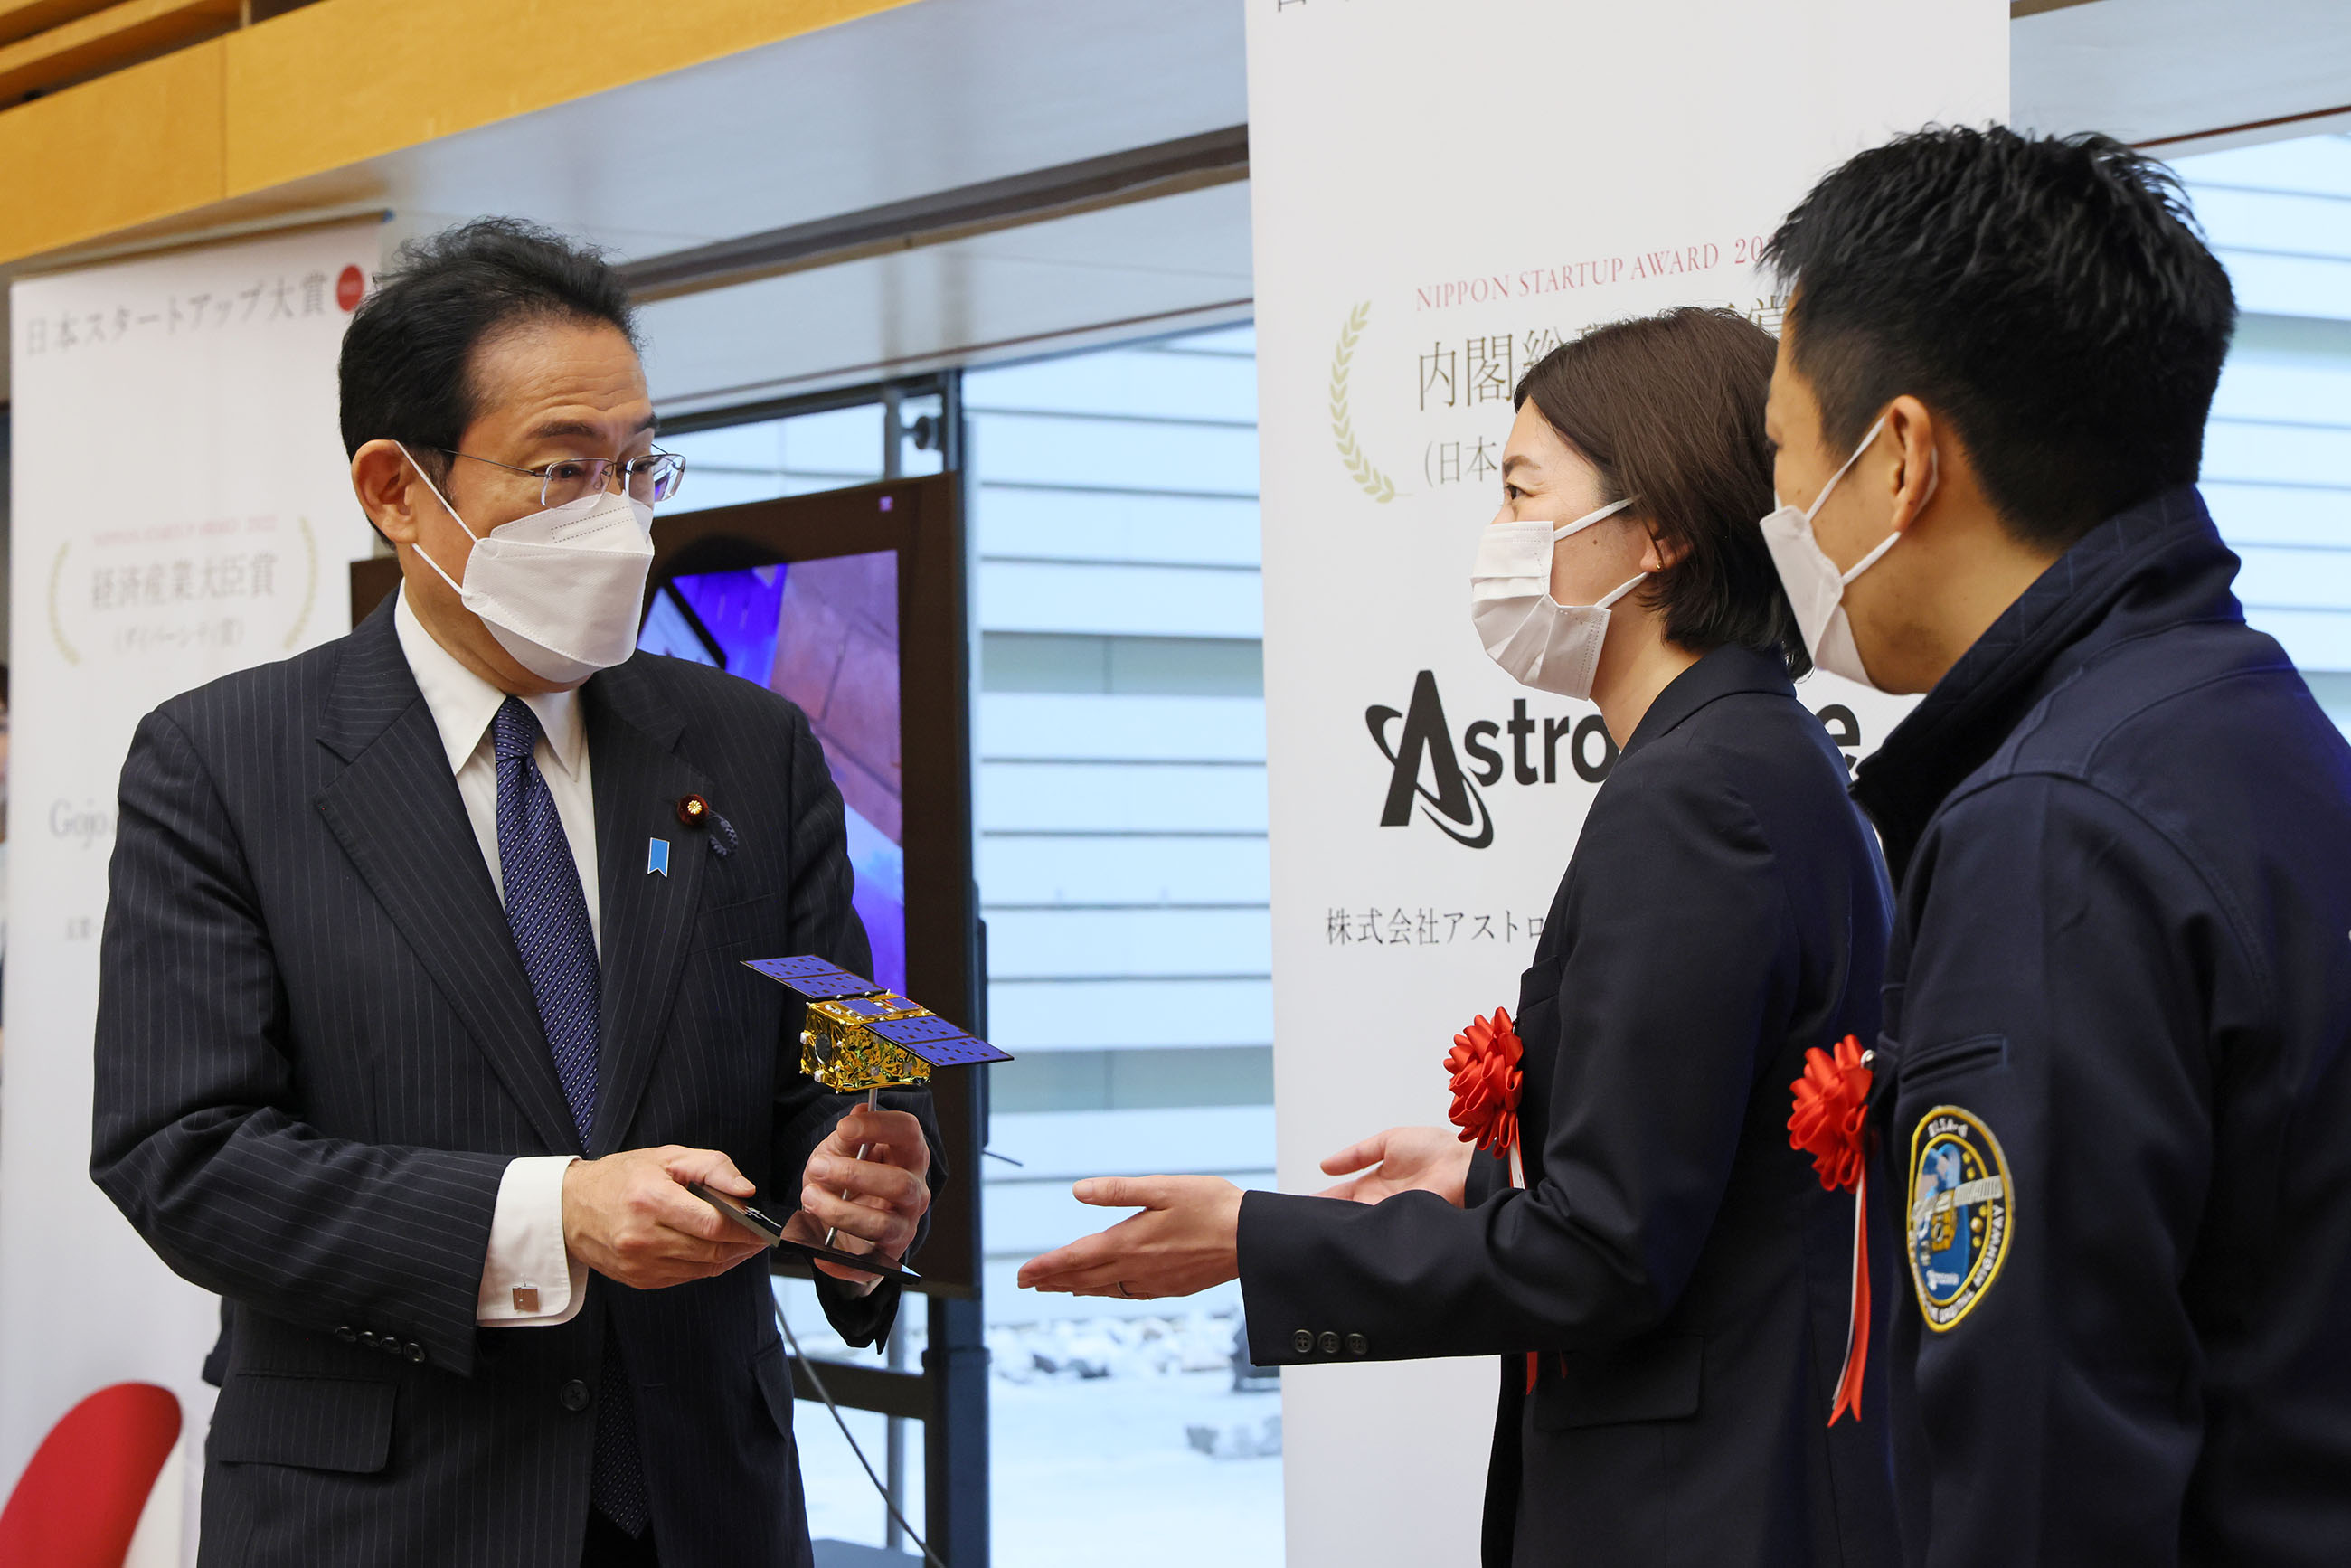 Awards Ceremony for the Nippon Startup Award 2022 